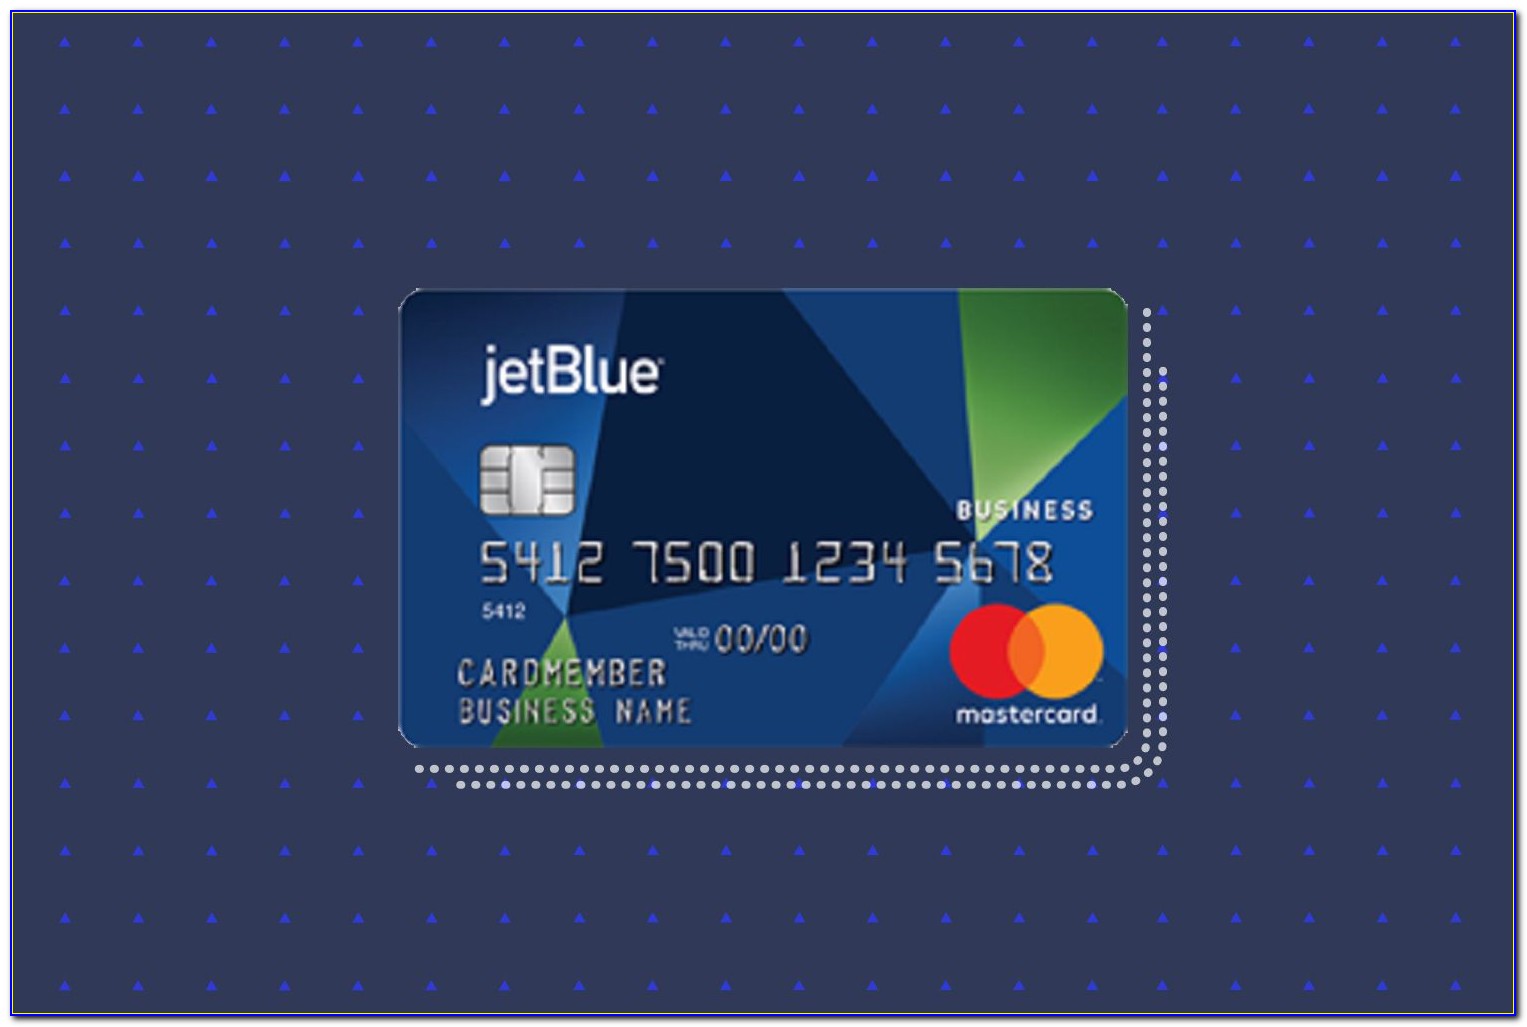 Jetblue Business Card Contact Number